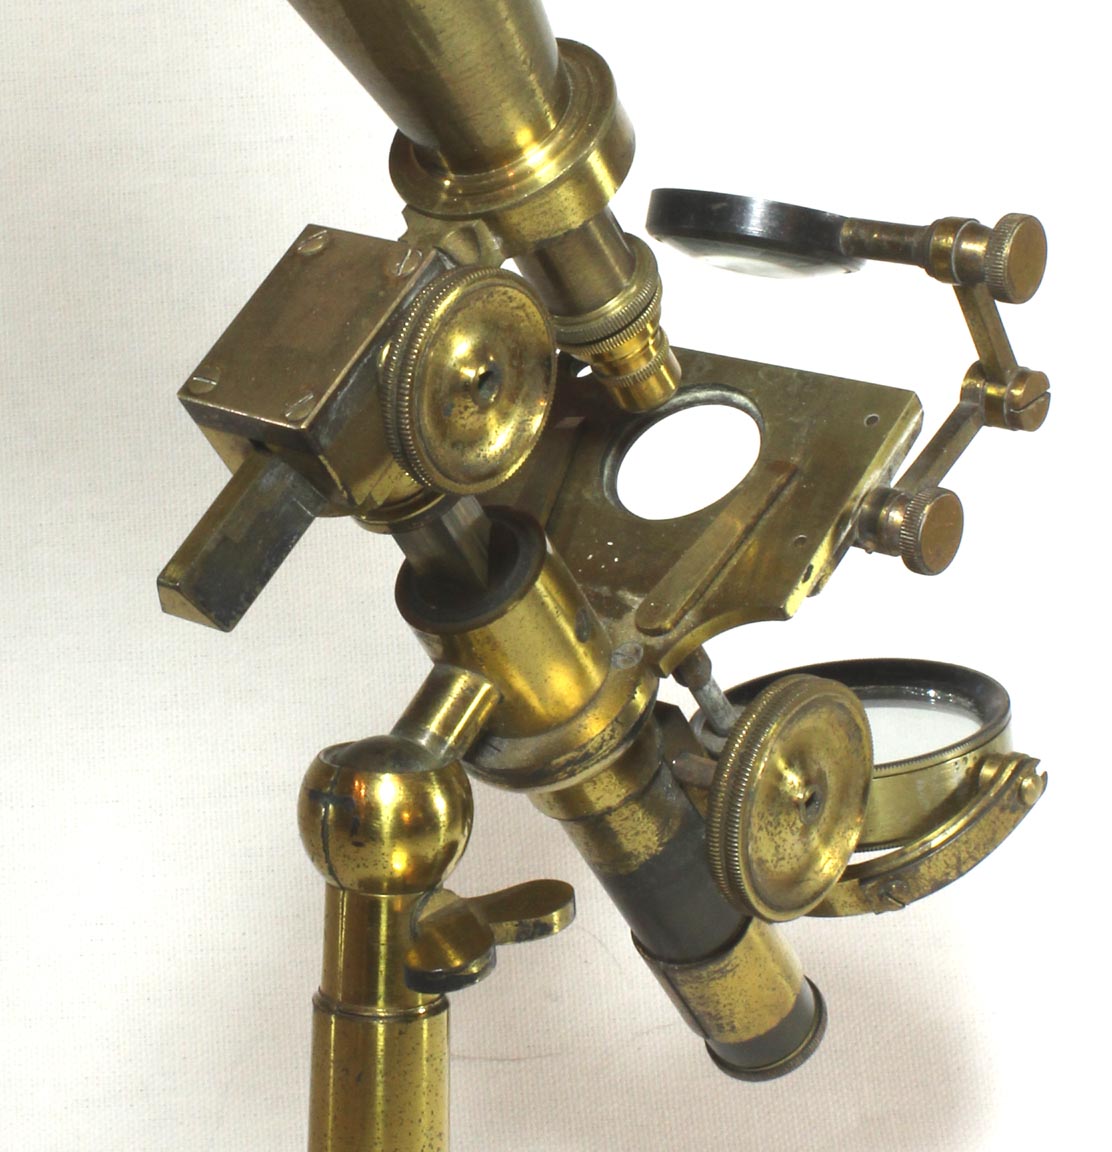 Cary Achromatic Microscope details